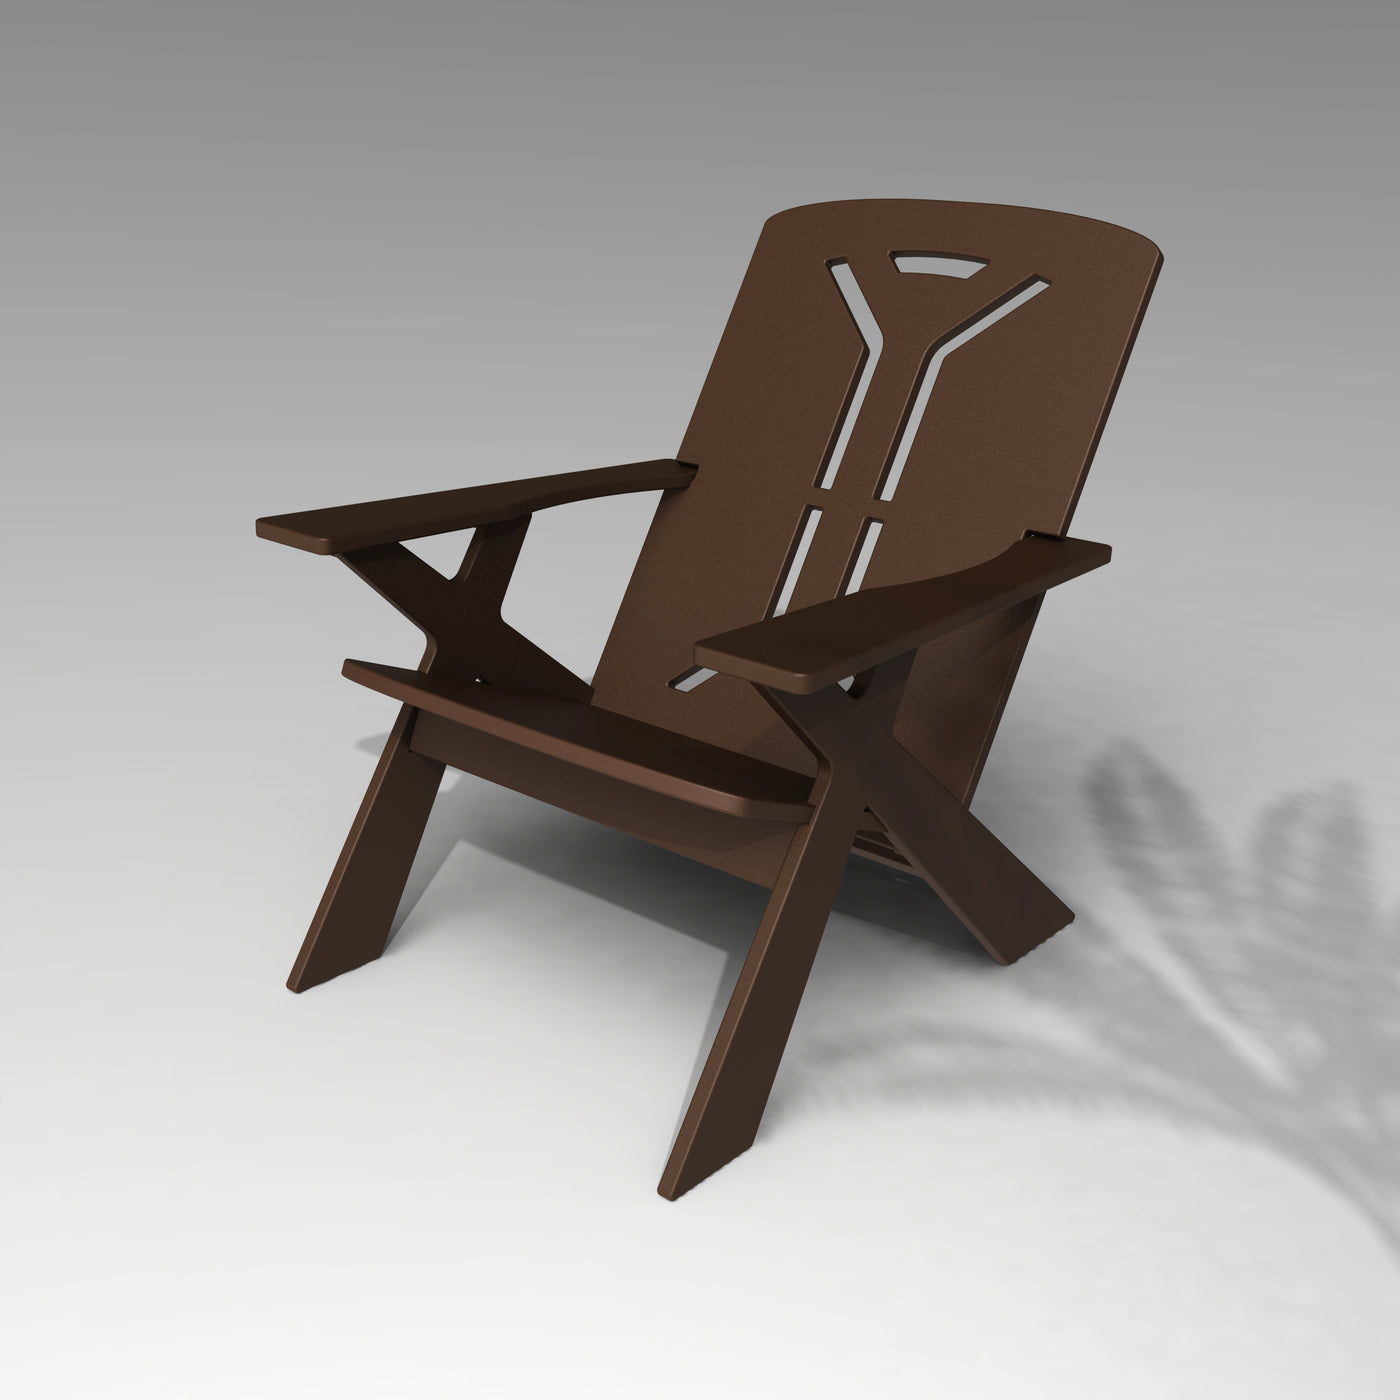 Long Pause Chair